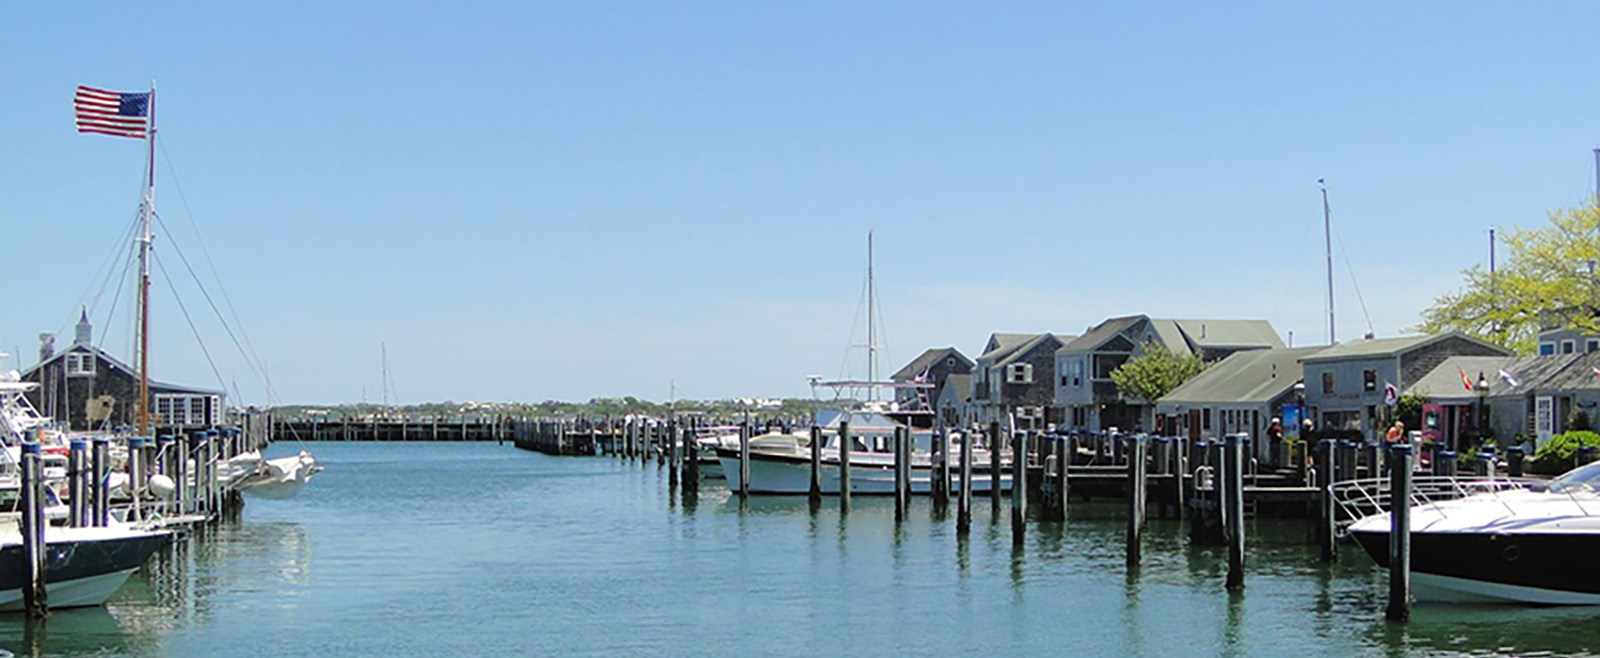 Summer is officially here and it's time to celebrate! If you're going to be on Nantucket this July, be sure to attend the following festivities that'll have you feeling in the summer spirit all month long.